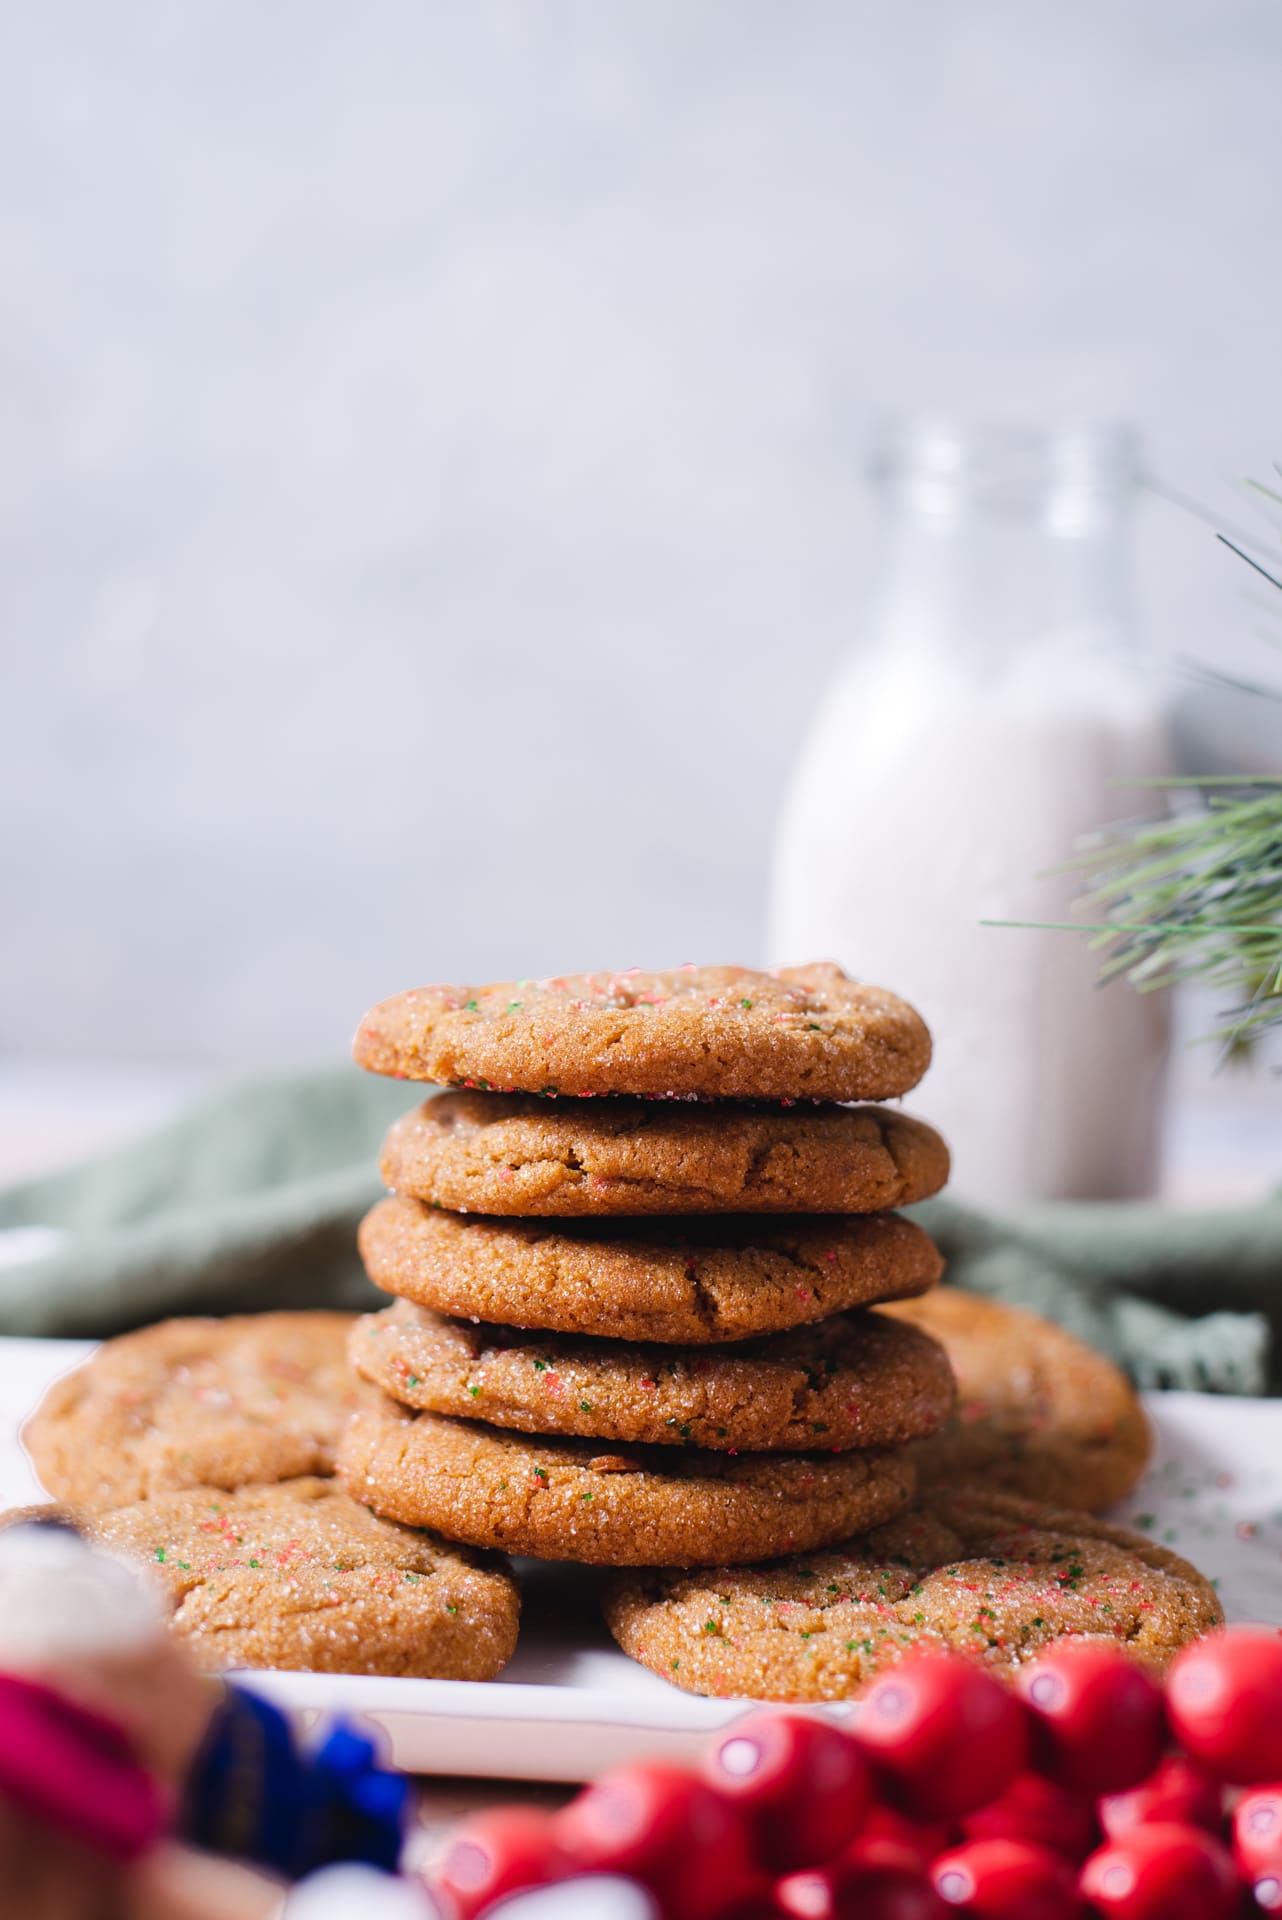 Side view of stack of five cookies with glass of milk in the background